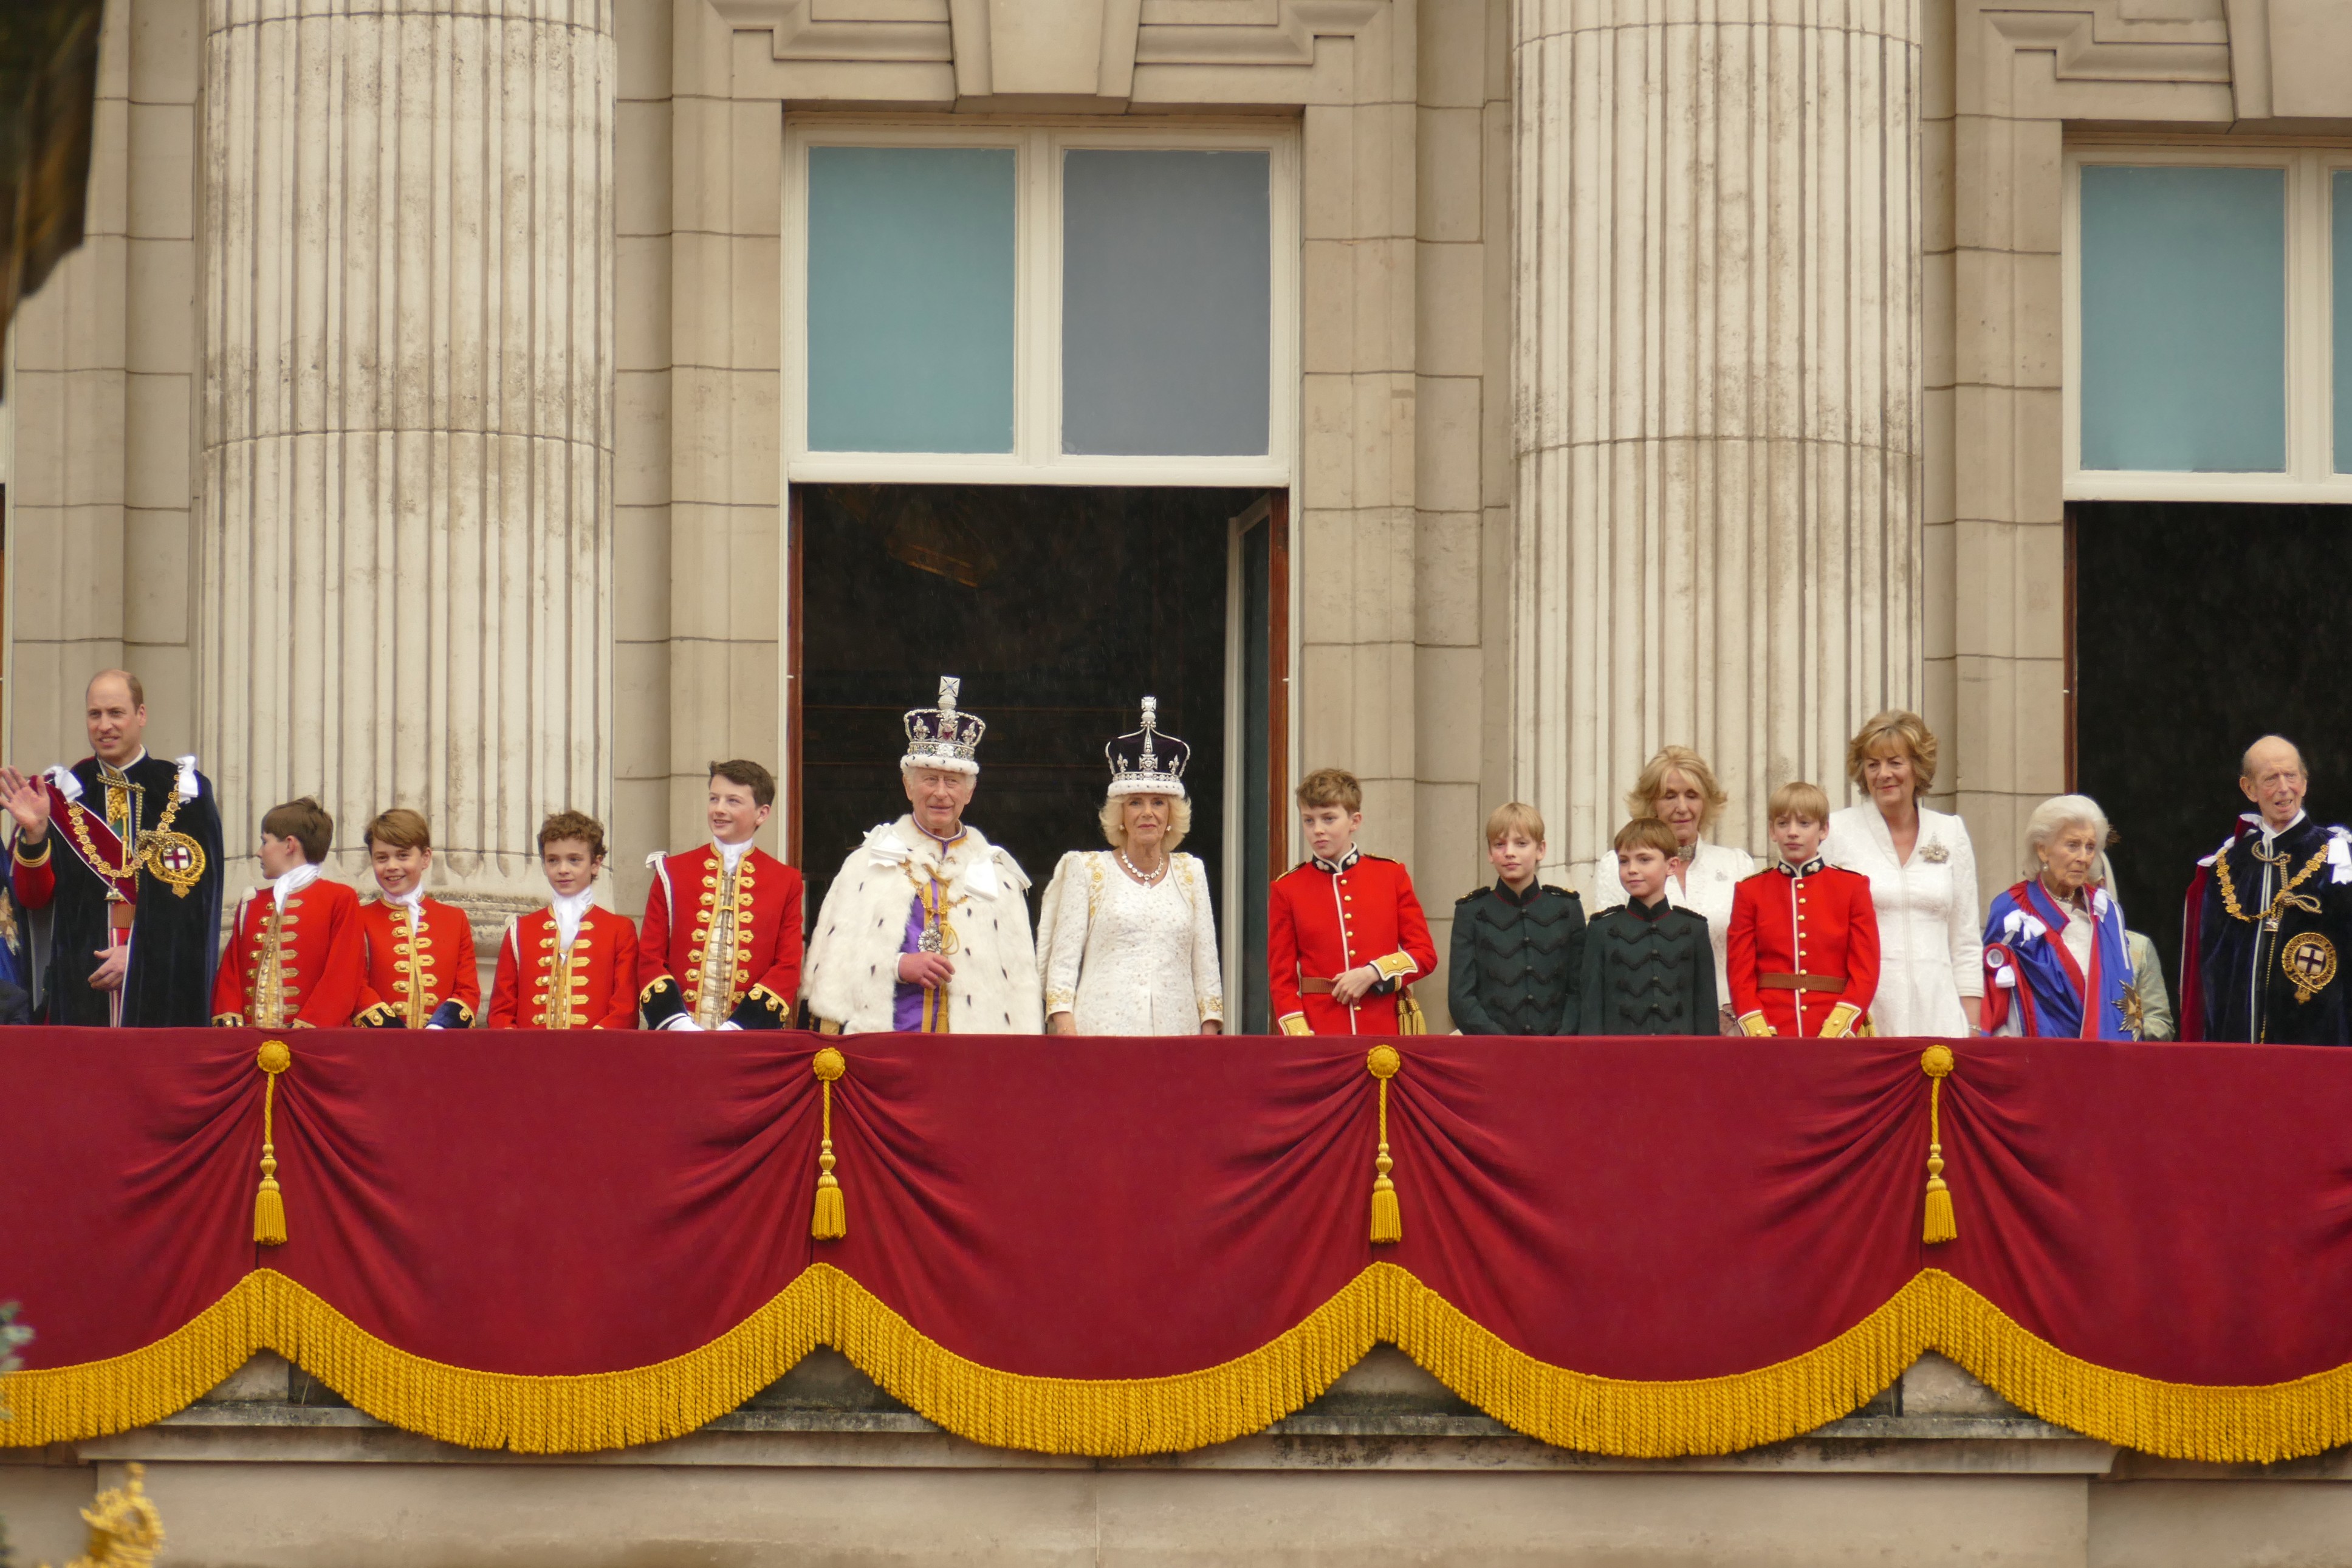 The balcony of Buckingham Palace with members of The Royal Family on it. 